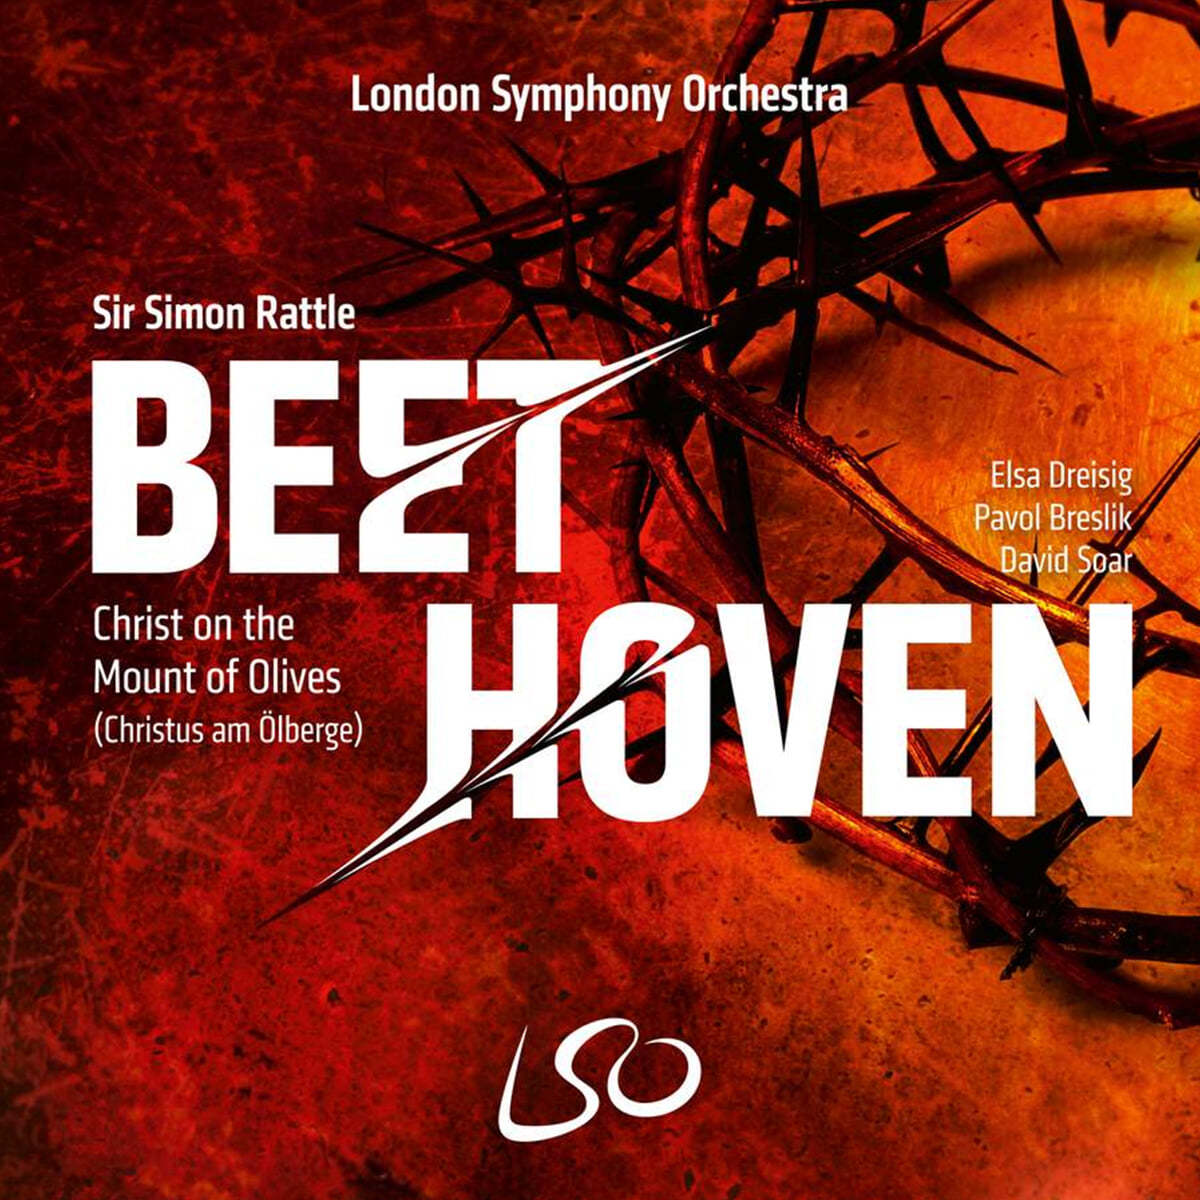 Simon Rattle 베토벤: 감람산 위의 그리스도 (Beethoven: Christ On the Mount of Olives Op.85) 